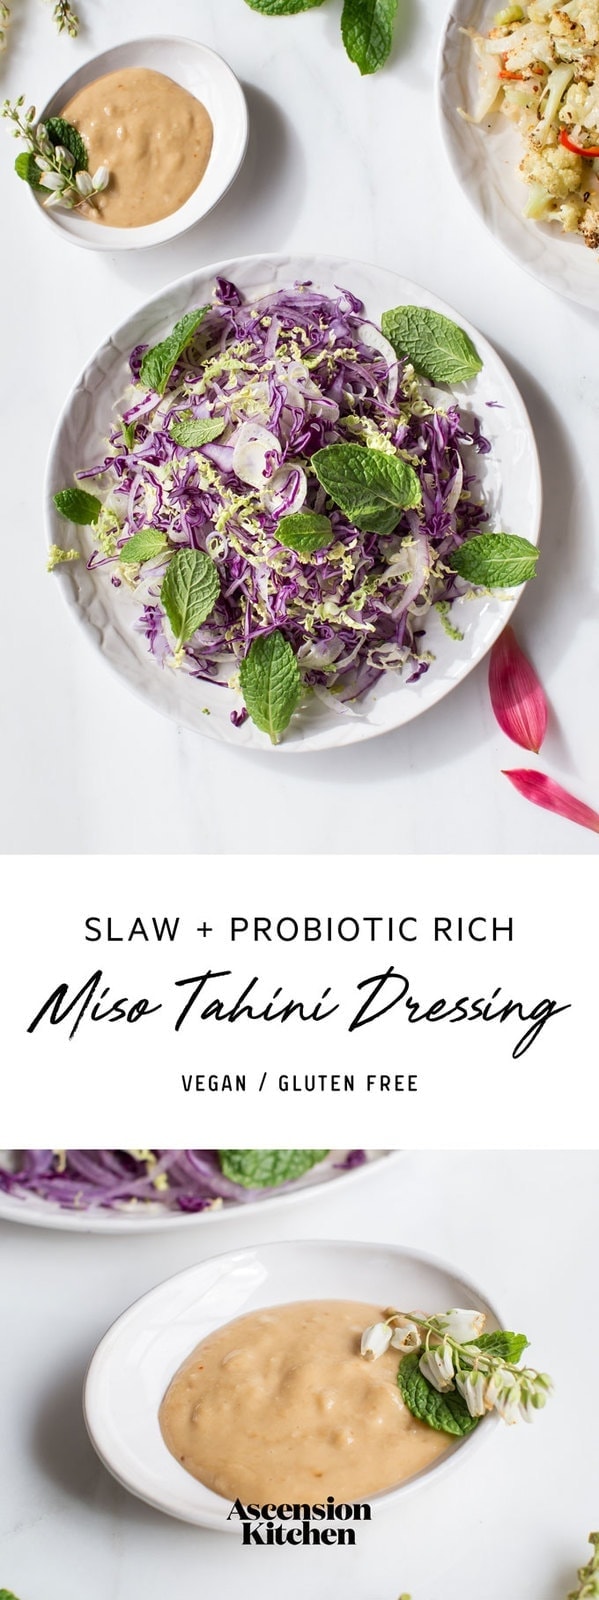 A healthy slaw with probiotic miso tahini dressing. #rainbowslaw #veganslaw #healthyslaw #slawrecipes #misotahinidressing #whole30recipes #veganrecipes #whole30dinner #AscensionKitchen // Pin to your own inspiration board! //